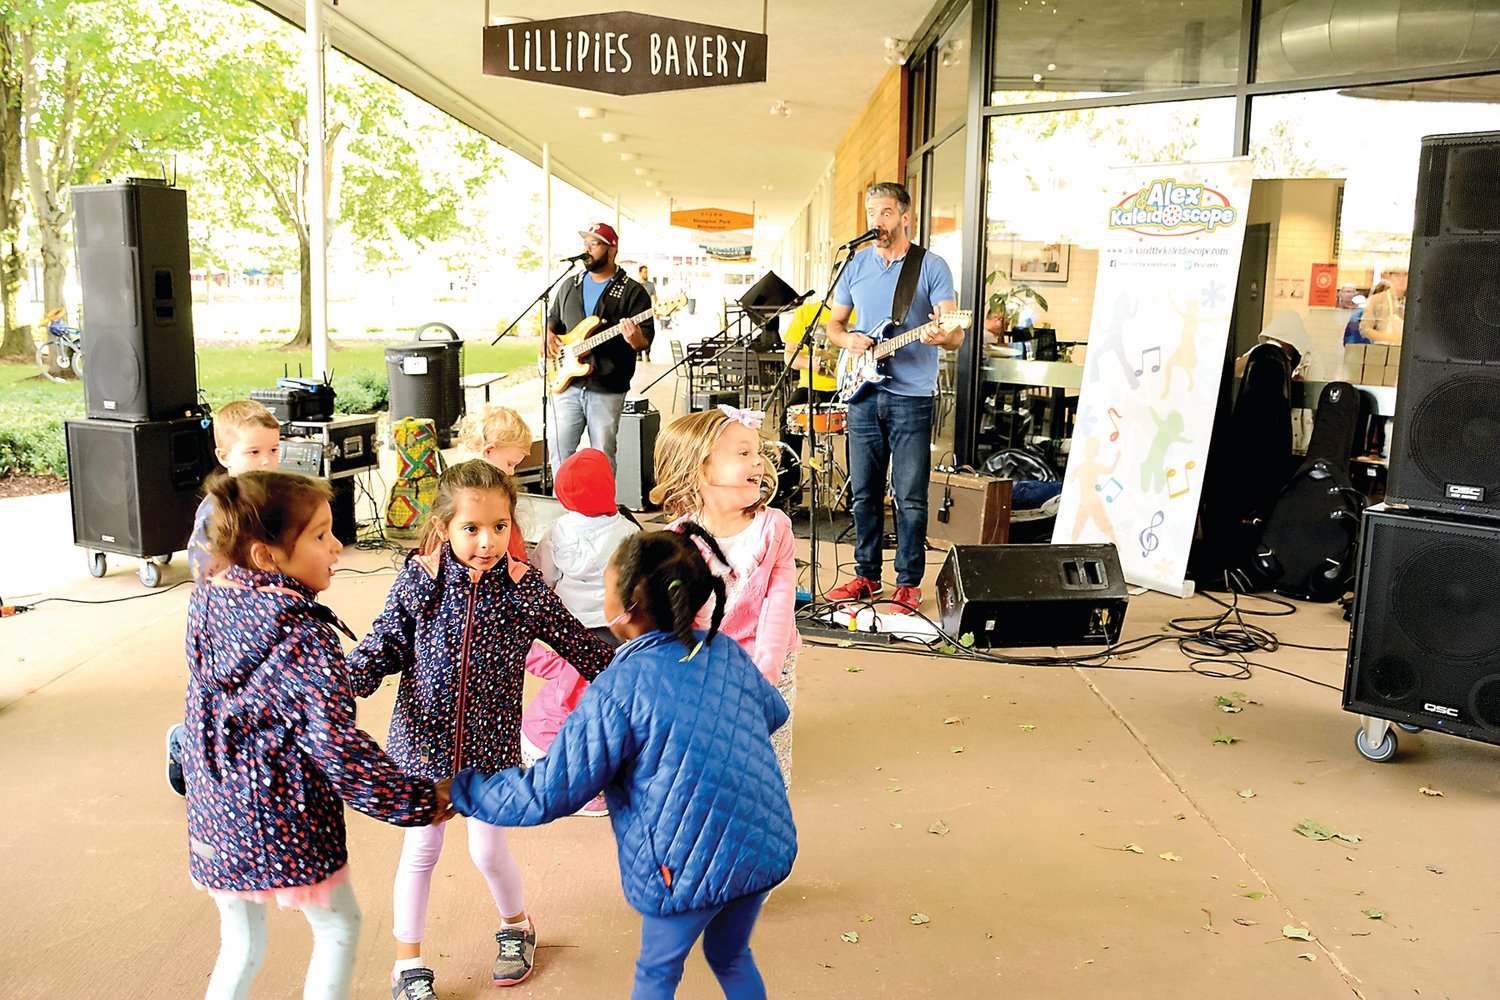 Children dance to the music at the Princeton Shopping Center, the site of “Tricks and Treats: An Afternoon of Family-Friendly Fall Fun,” from 3 to 5 p.m. Oct. 19.